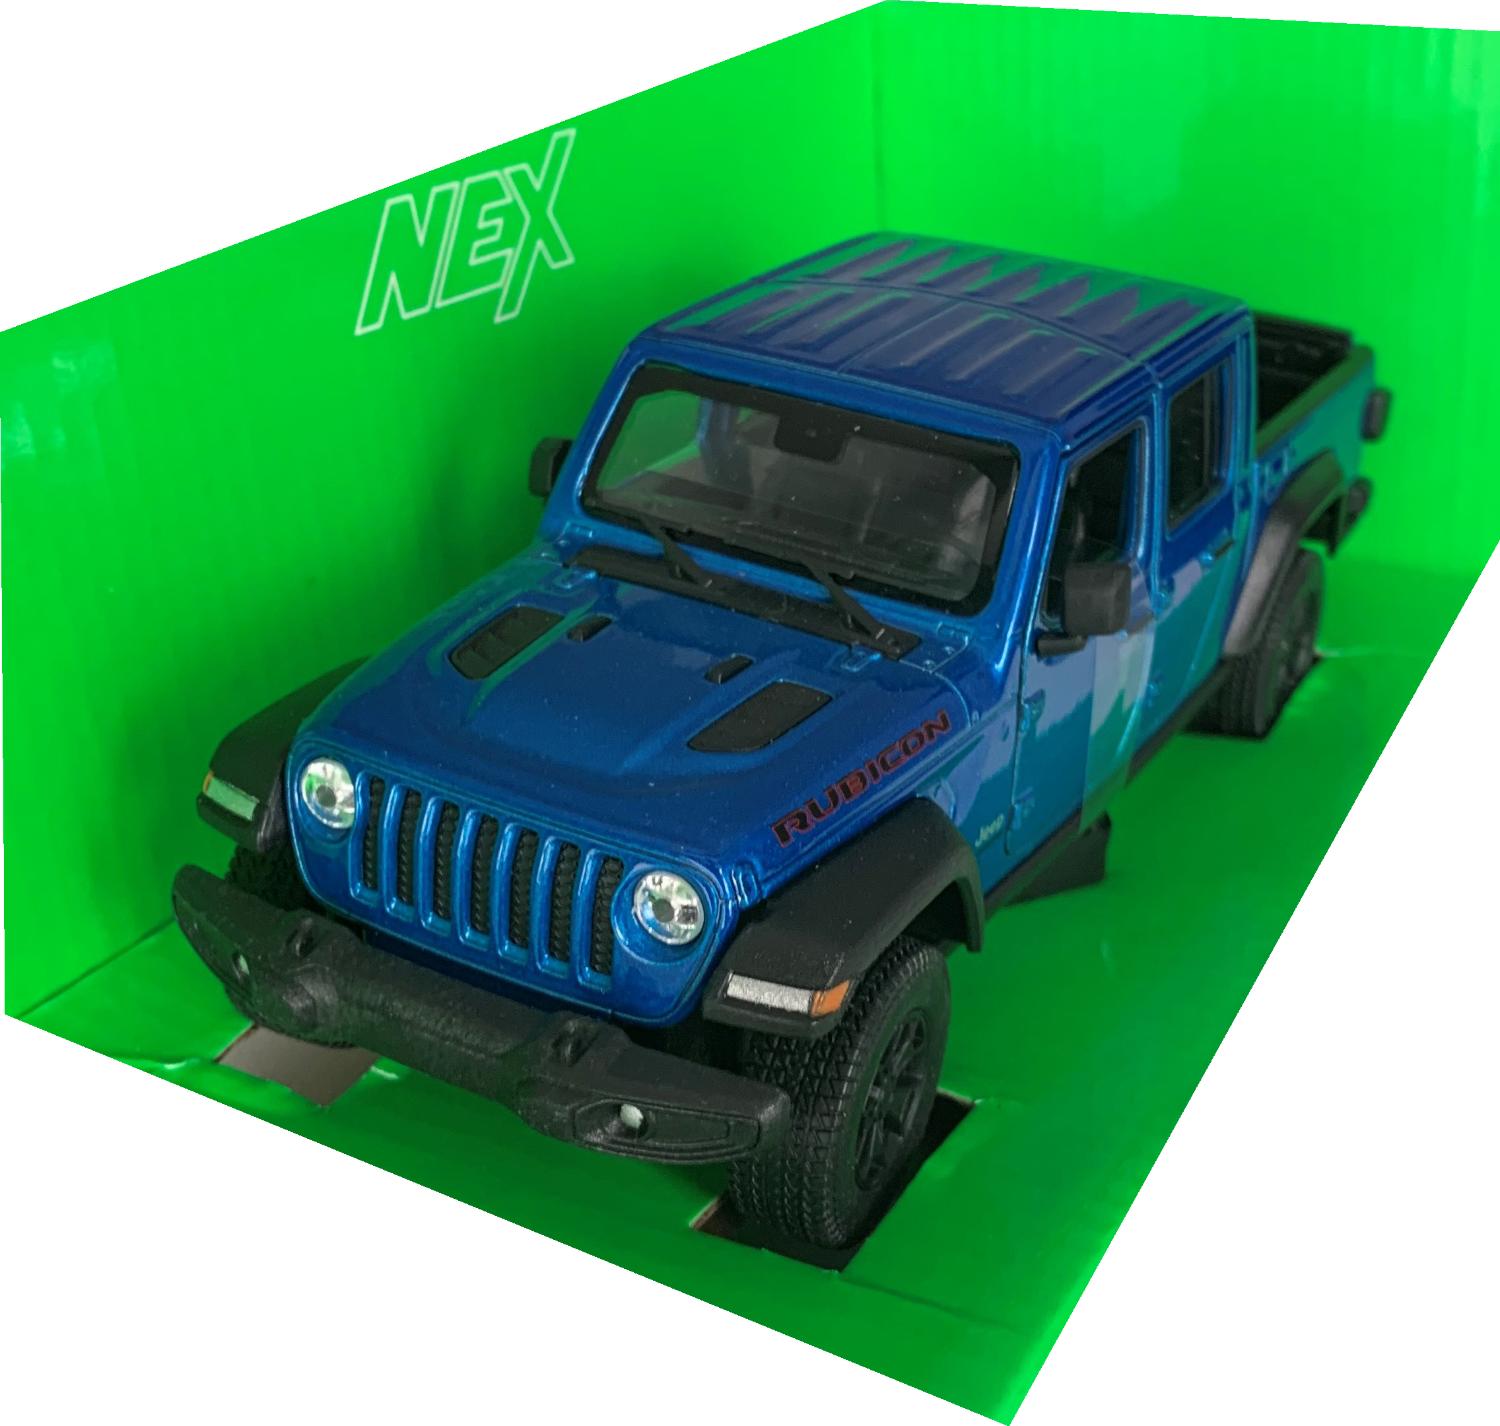 Jeep Gladiator Rubicon 2020 in blue 1:27 scale model from Welly